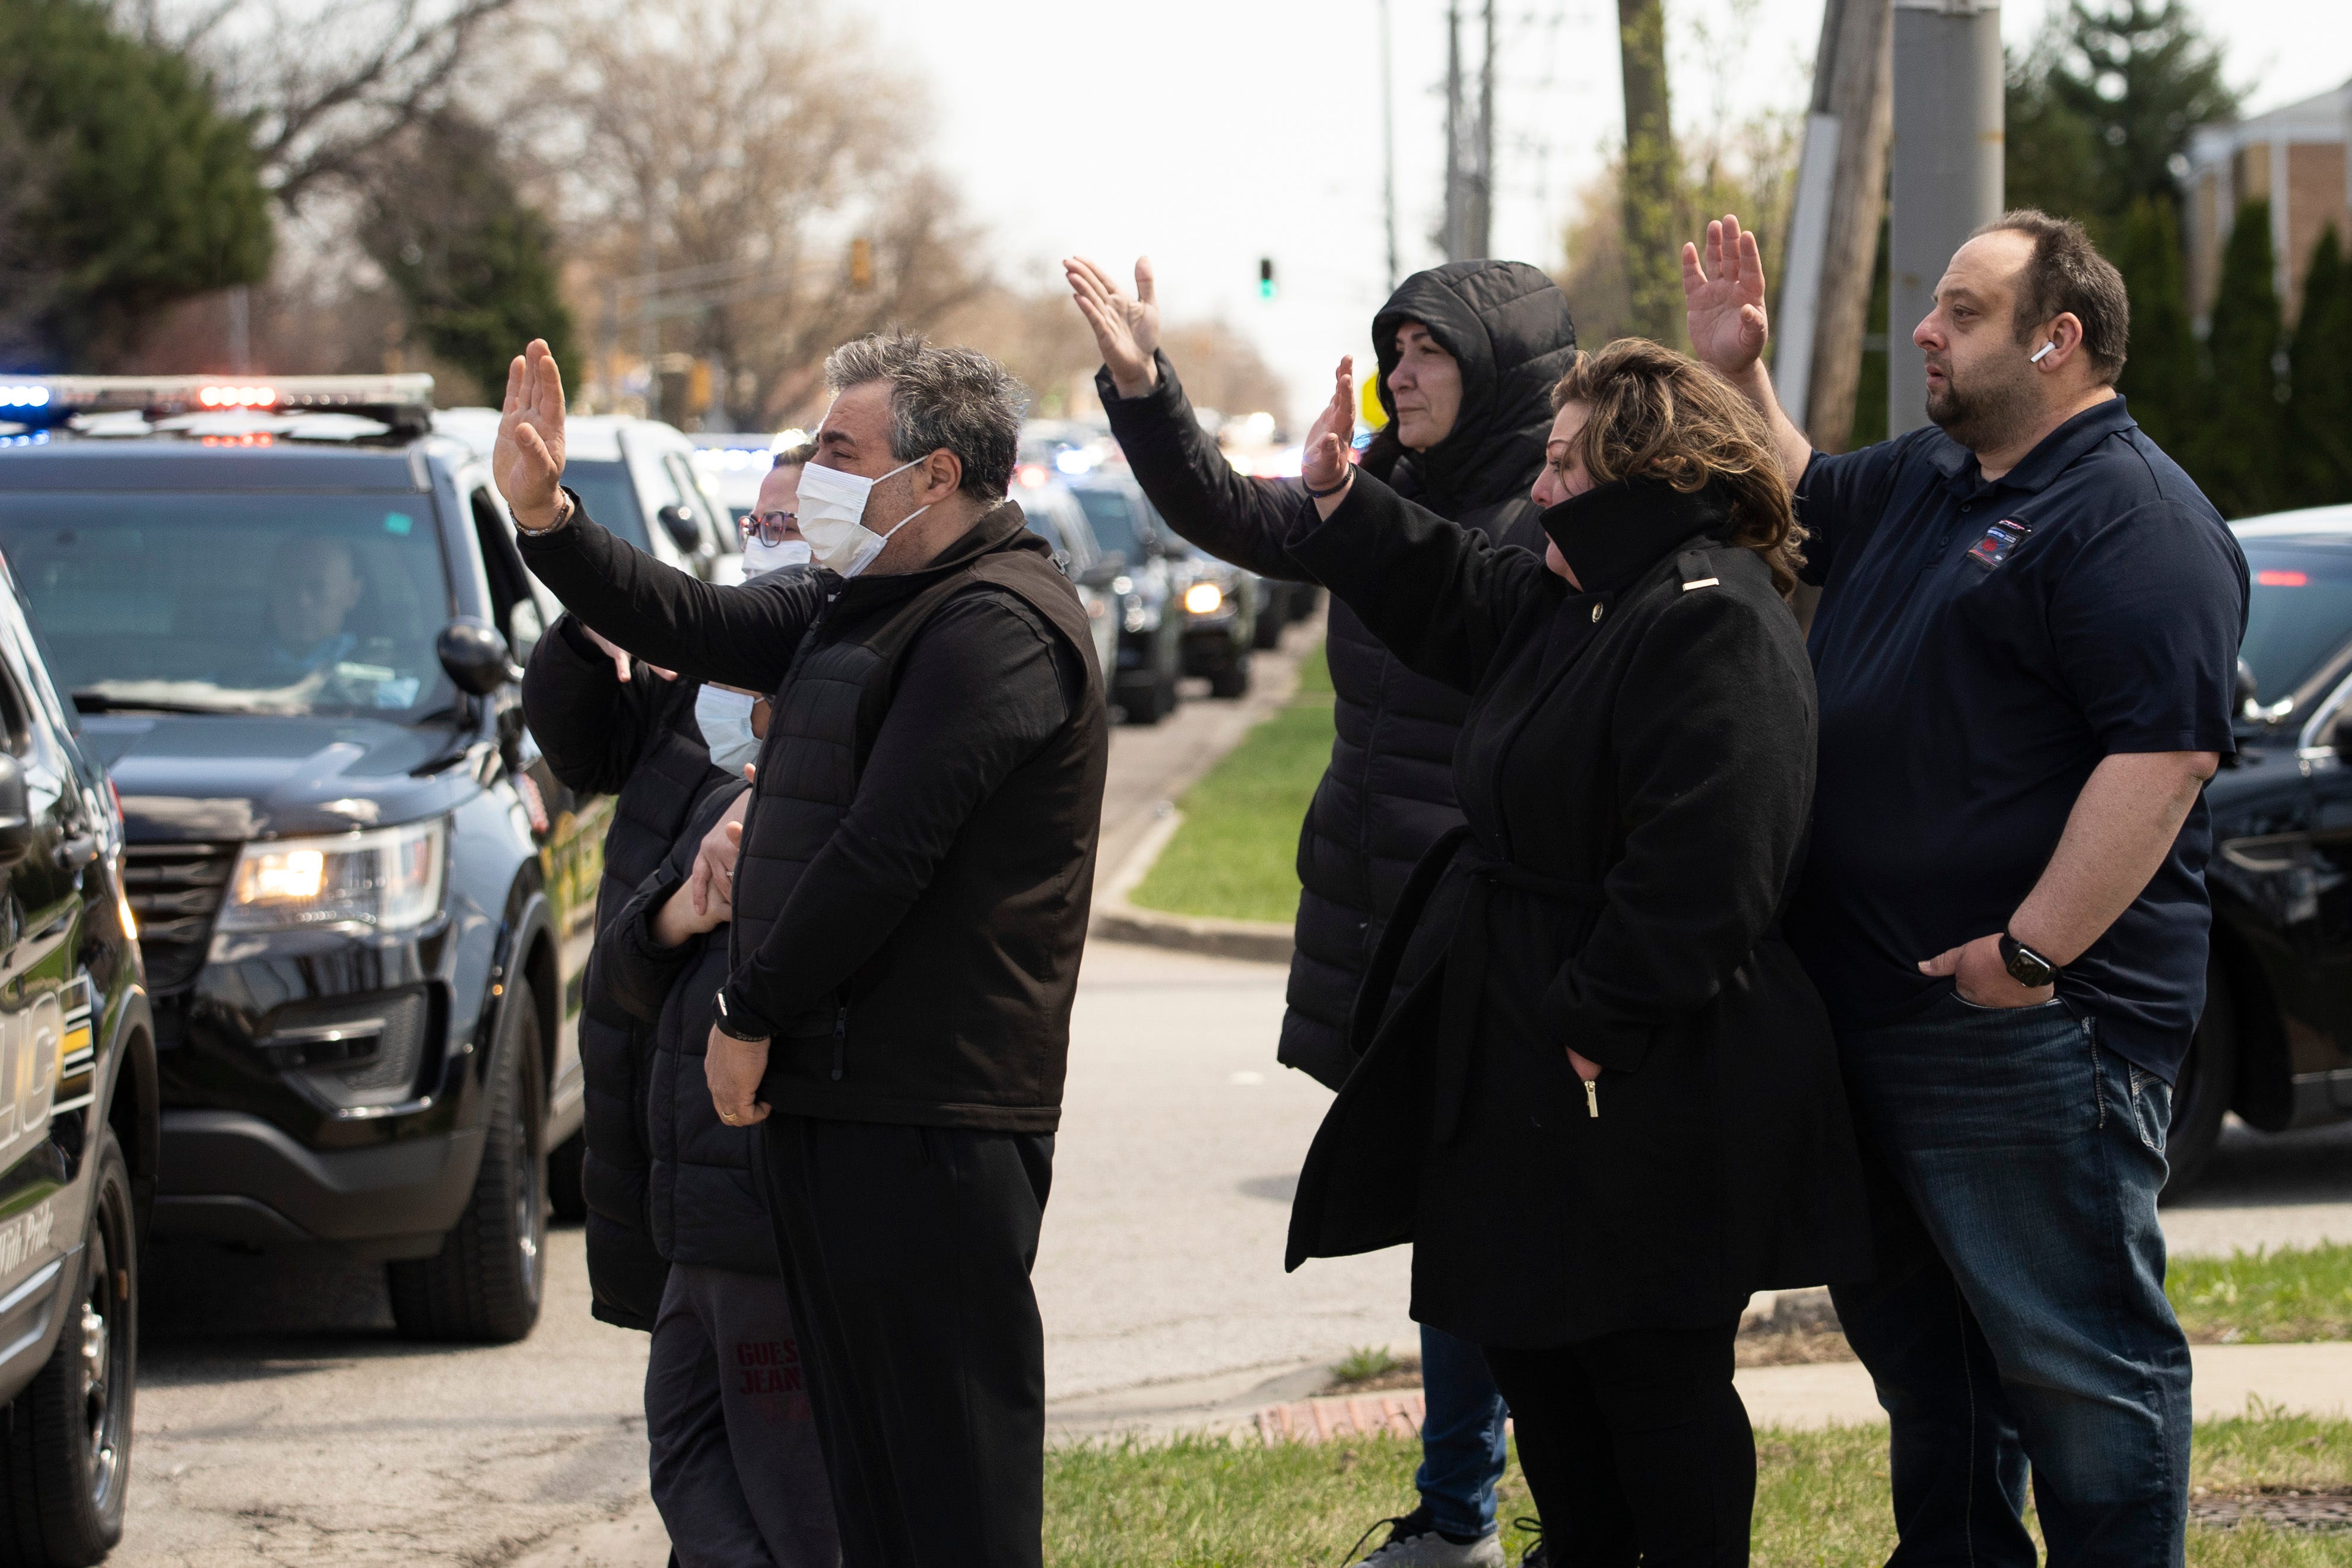 Family and friends of Chicago Police Officer Marco DiFranco, who had to stand outside during the funeral amid fears of the coronavirus pandemic, wave goodbye as the hearse leaves Cumberland Funeral Chapels, Thursday, April 9, 2020, in Norridge, Ilinois. DiFranco, 50, died April 2 from complications from COVID-19, making him the first Chicago police officer to lose his life to the coronavirus.